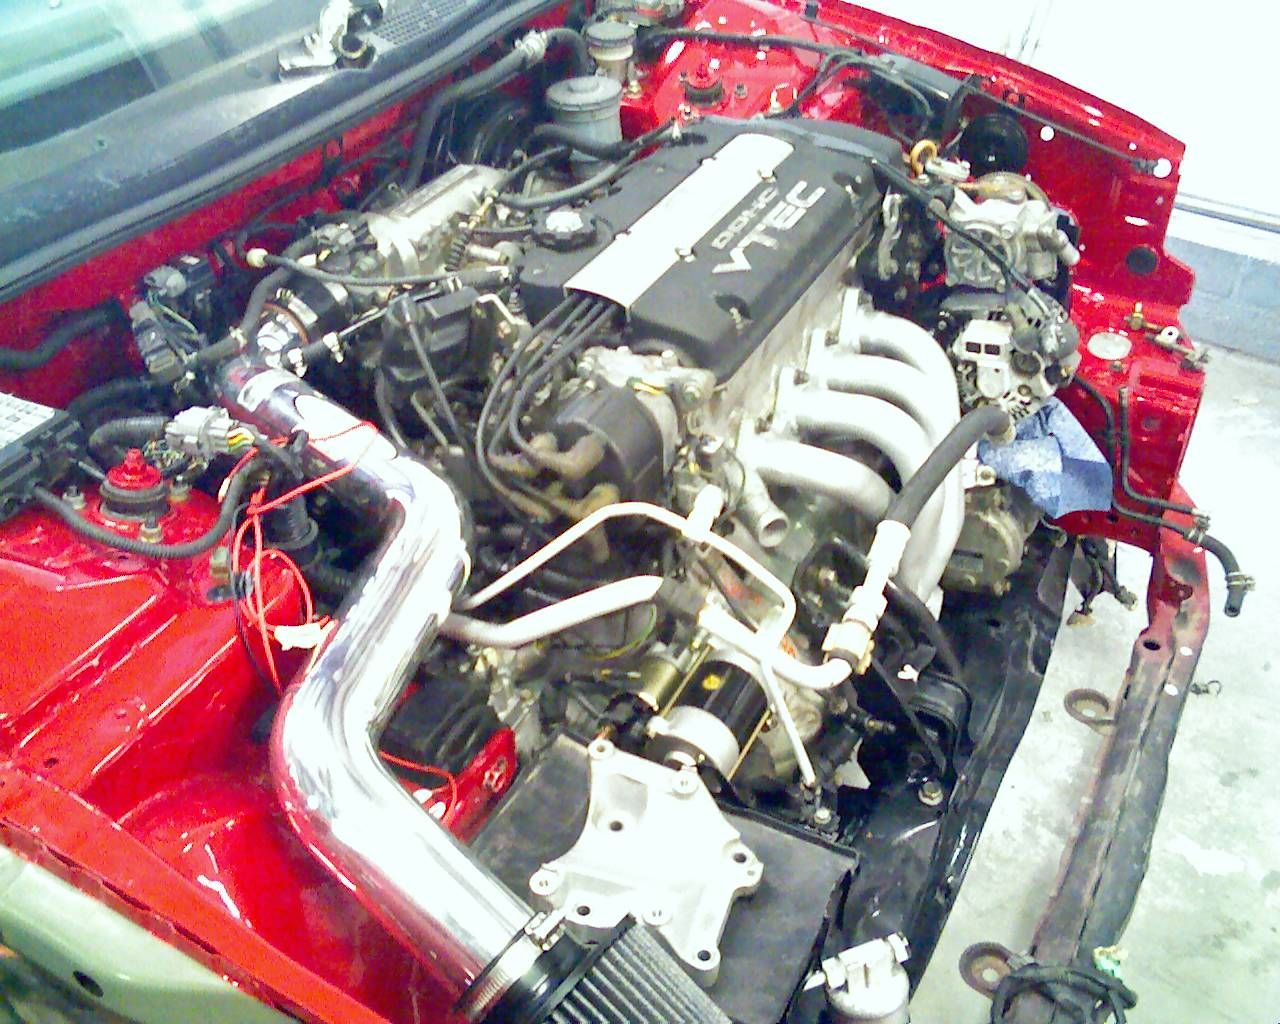 H22 in 97 Accord